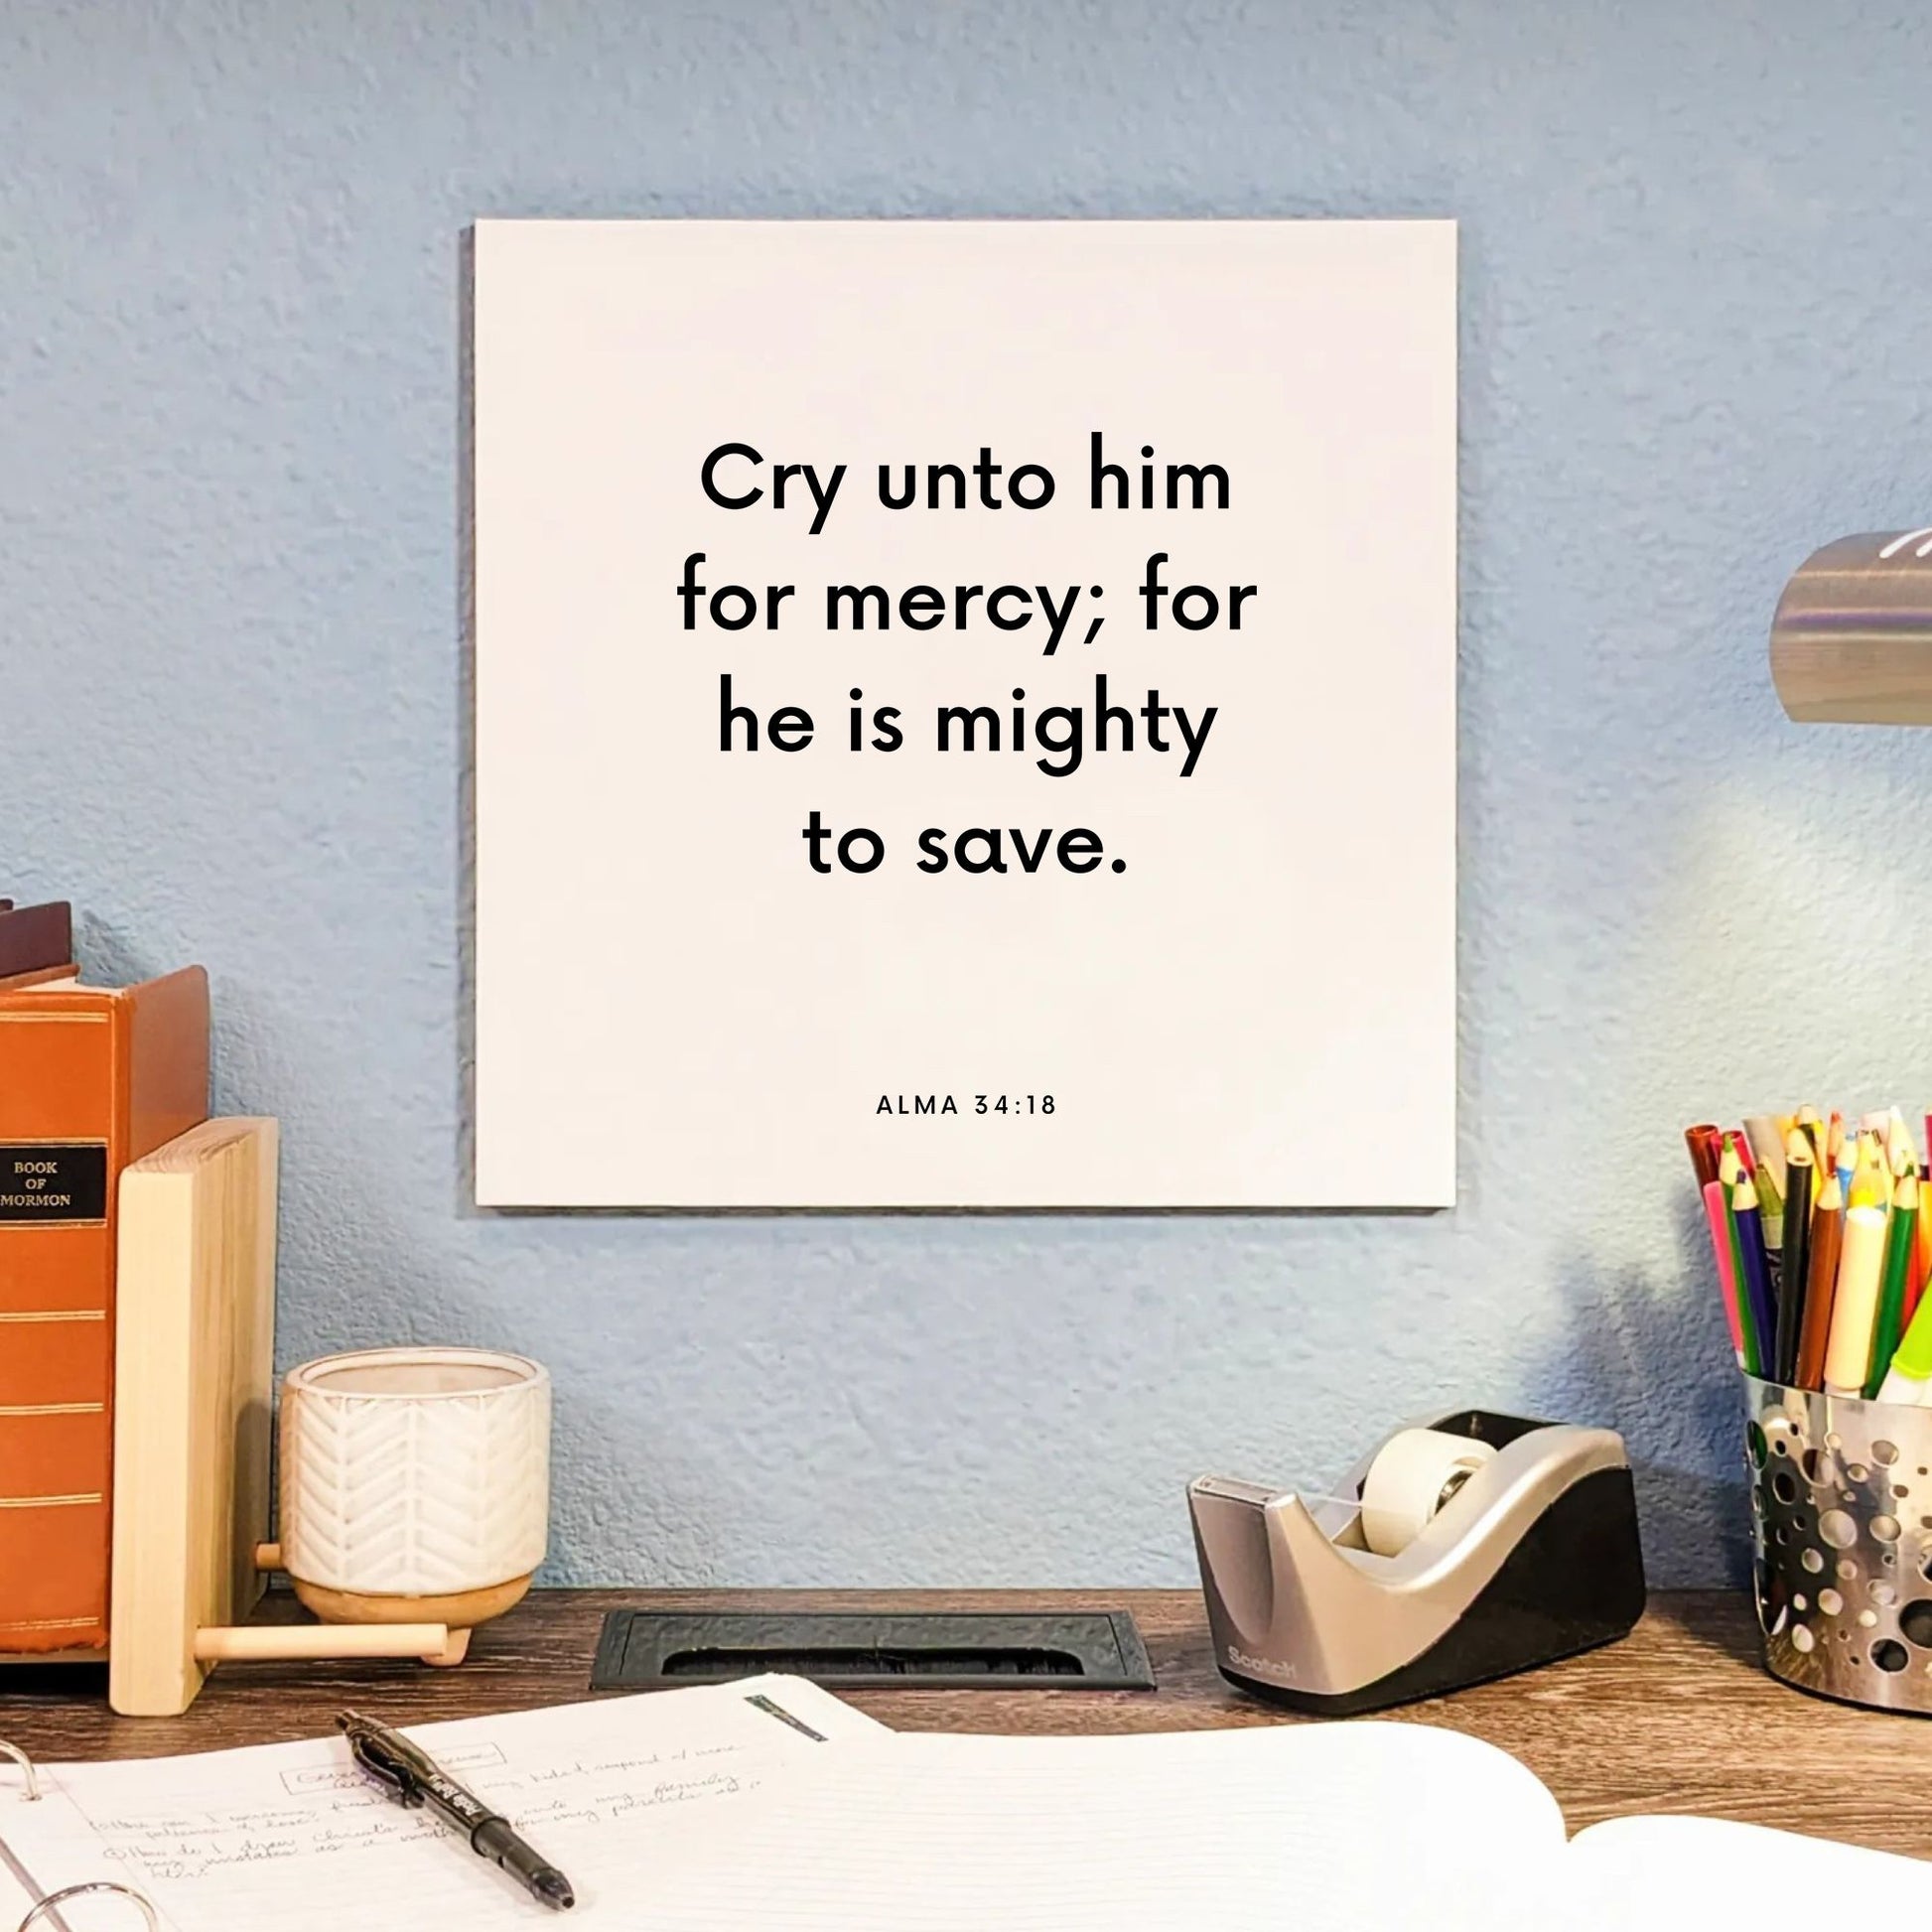 Desk mouting of the scripture tile for Alma 34:18 - "Cry unto him for mercy; for he is mighty to save."